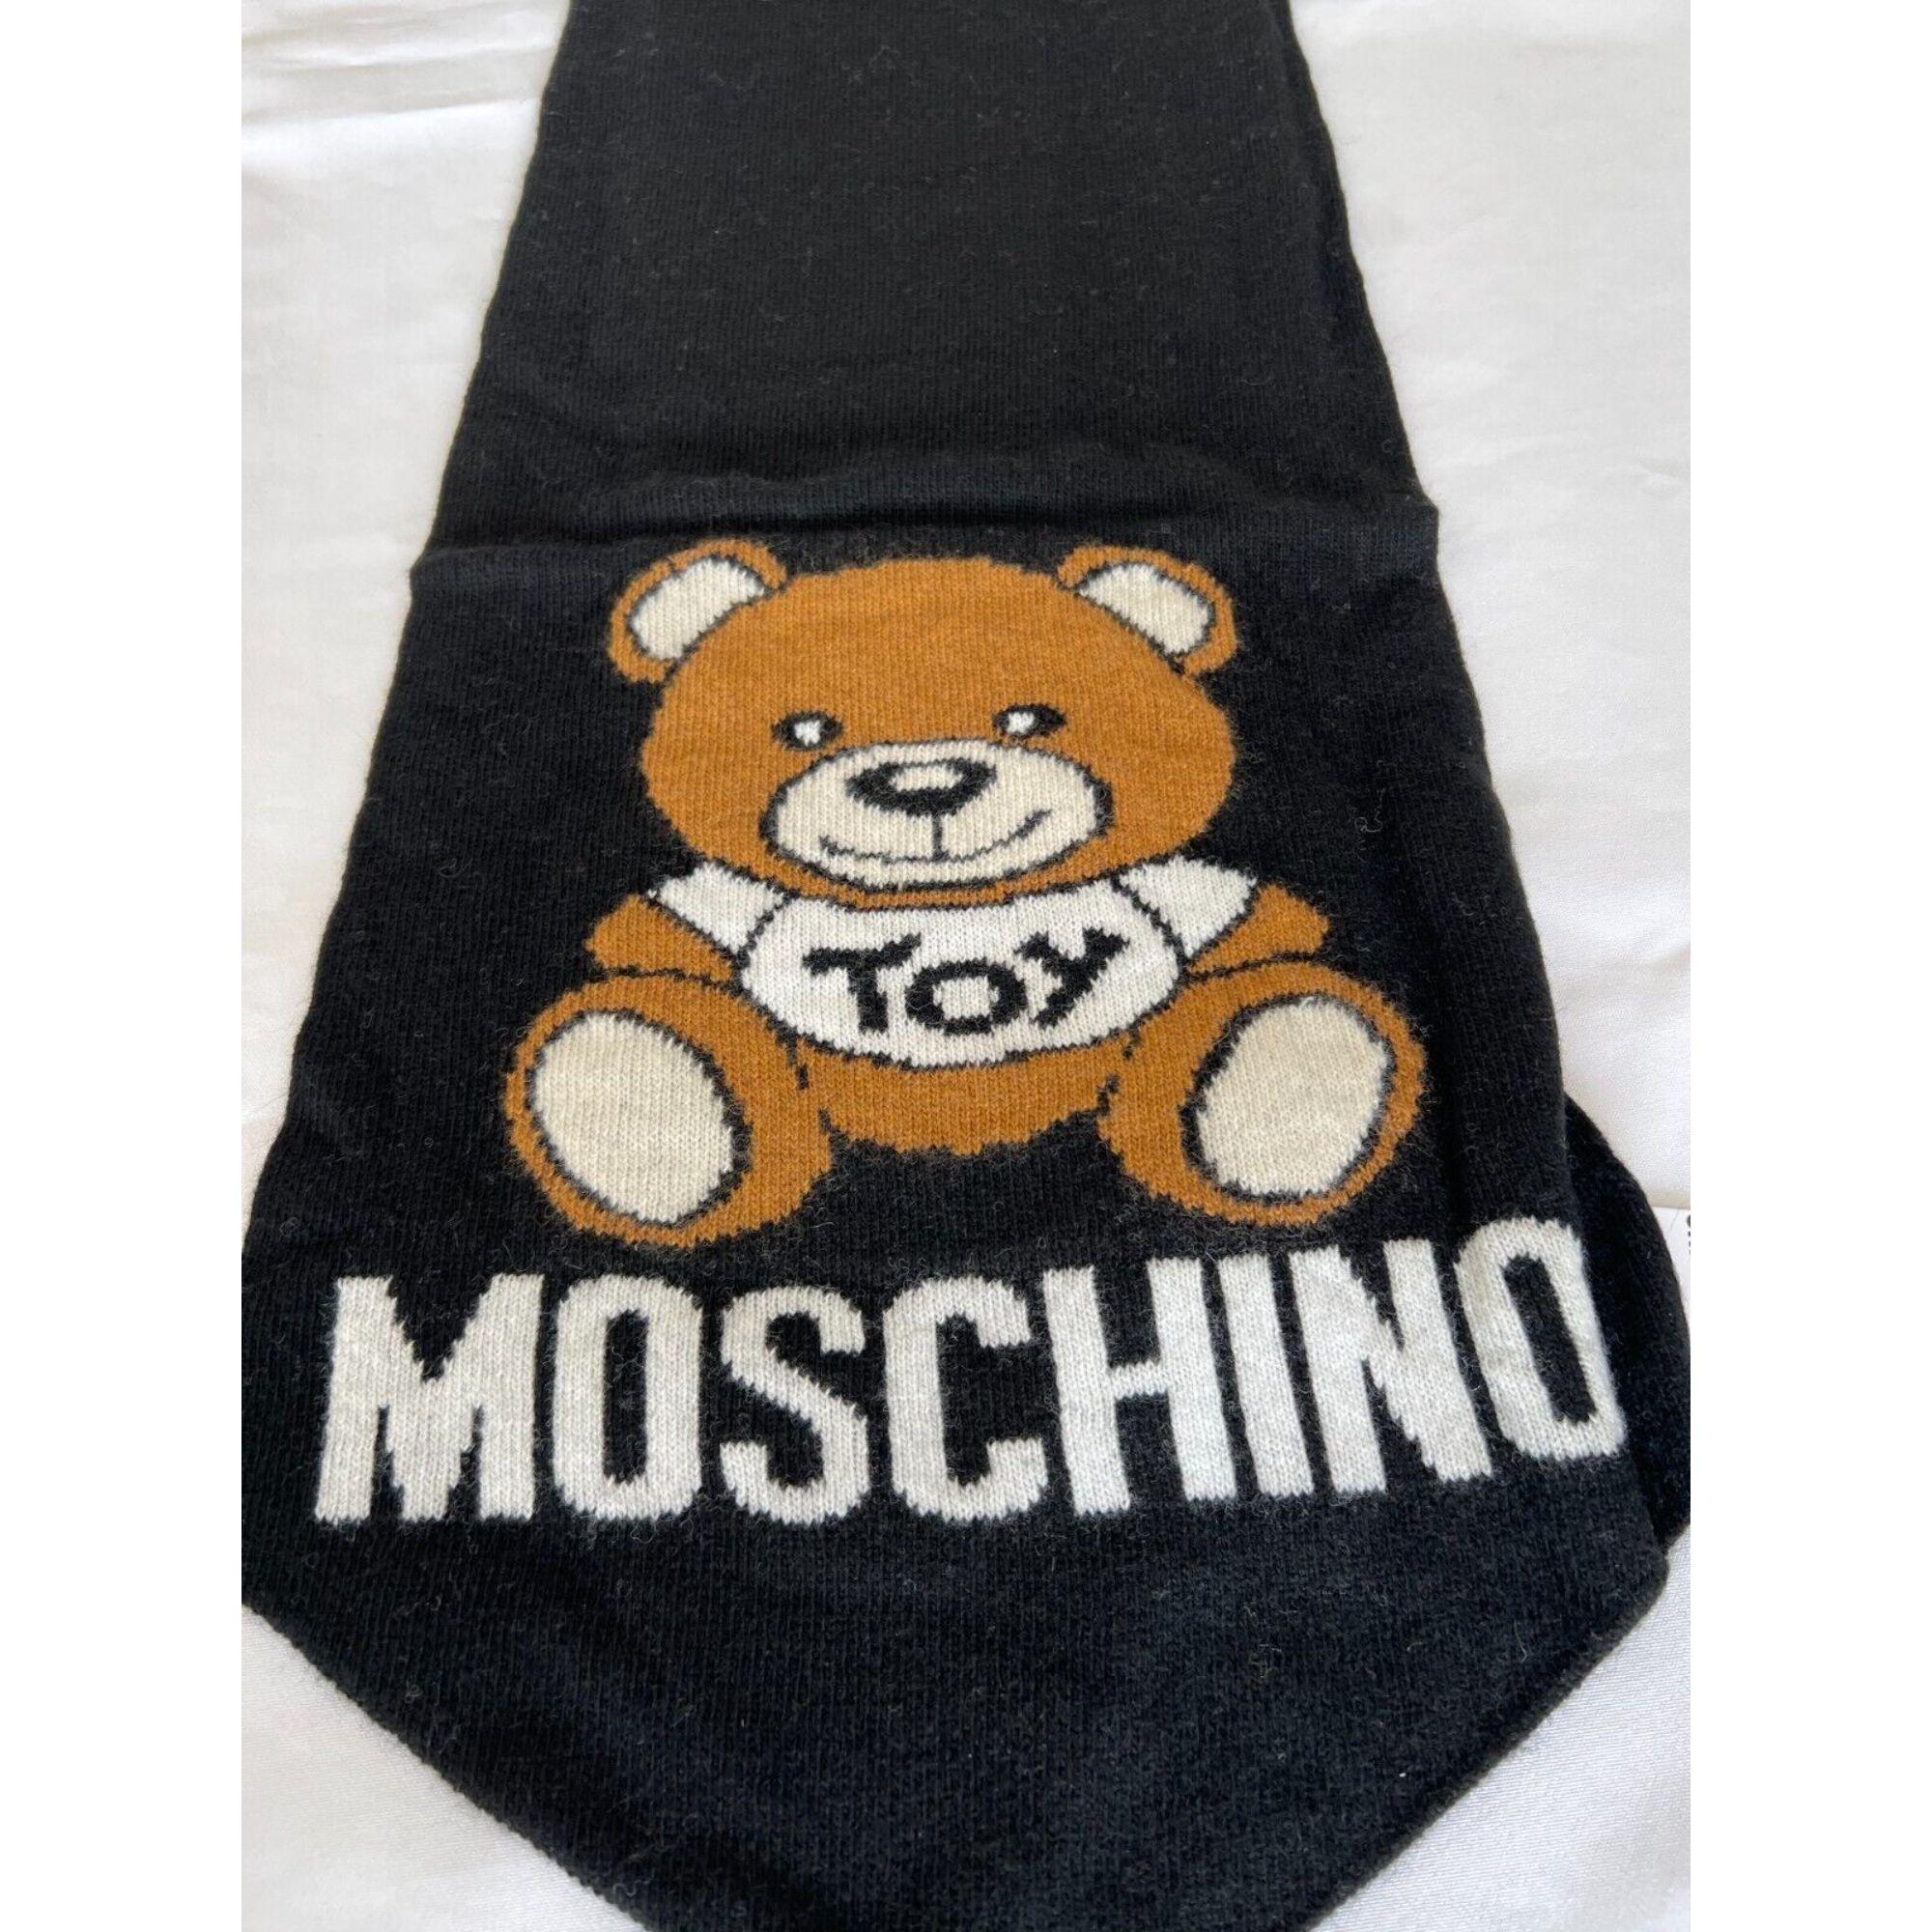 Women's Moschino Couture Teddy Bear Black Scarf Tie Shaped by Jeremy Scott For Sale